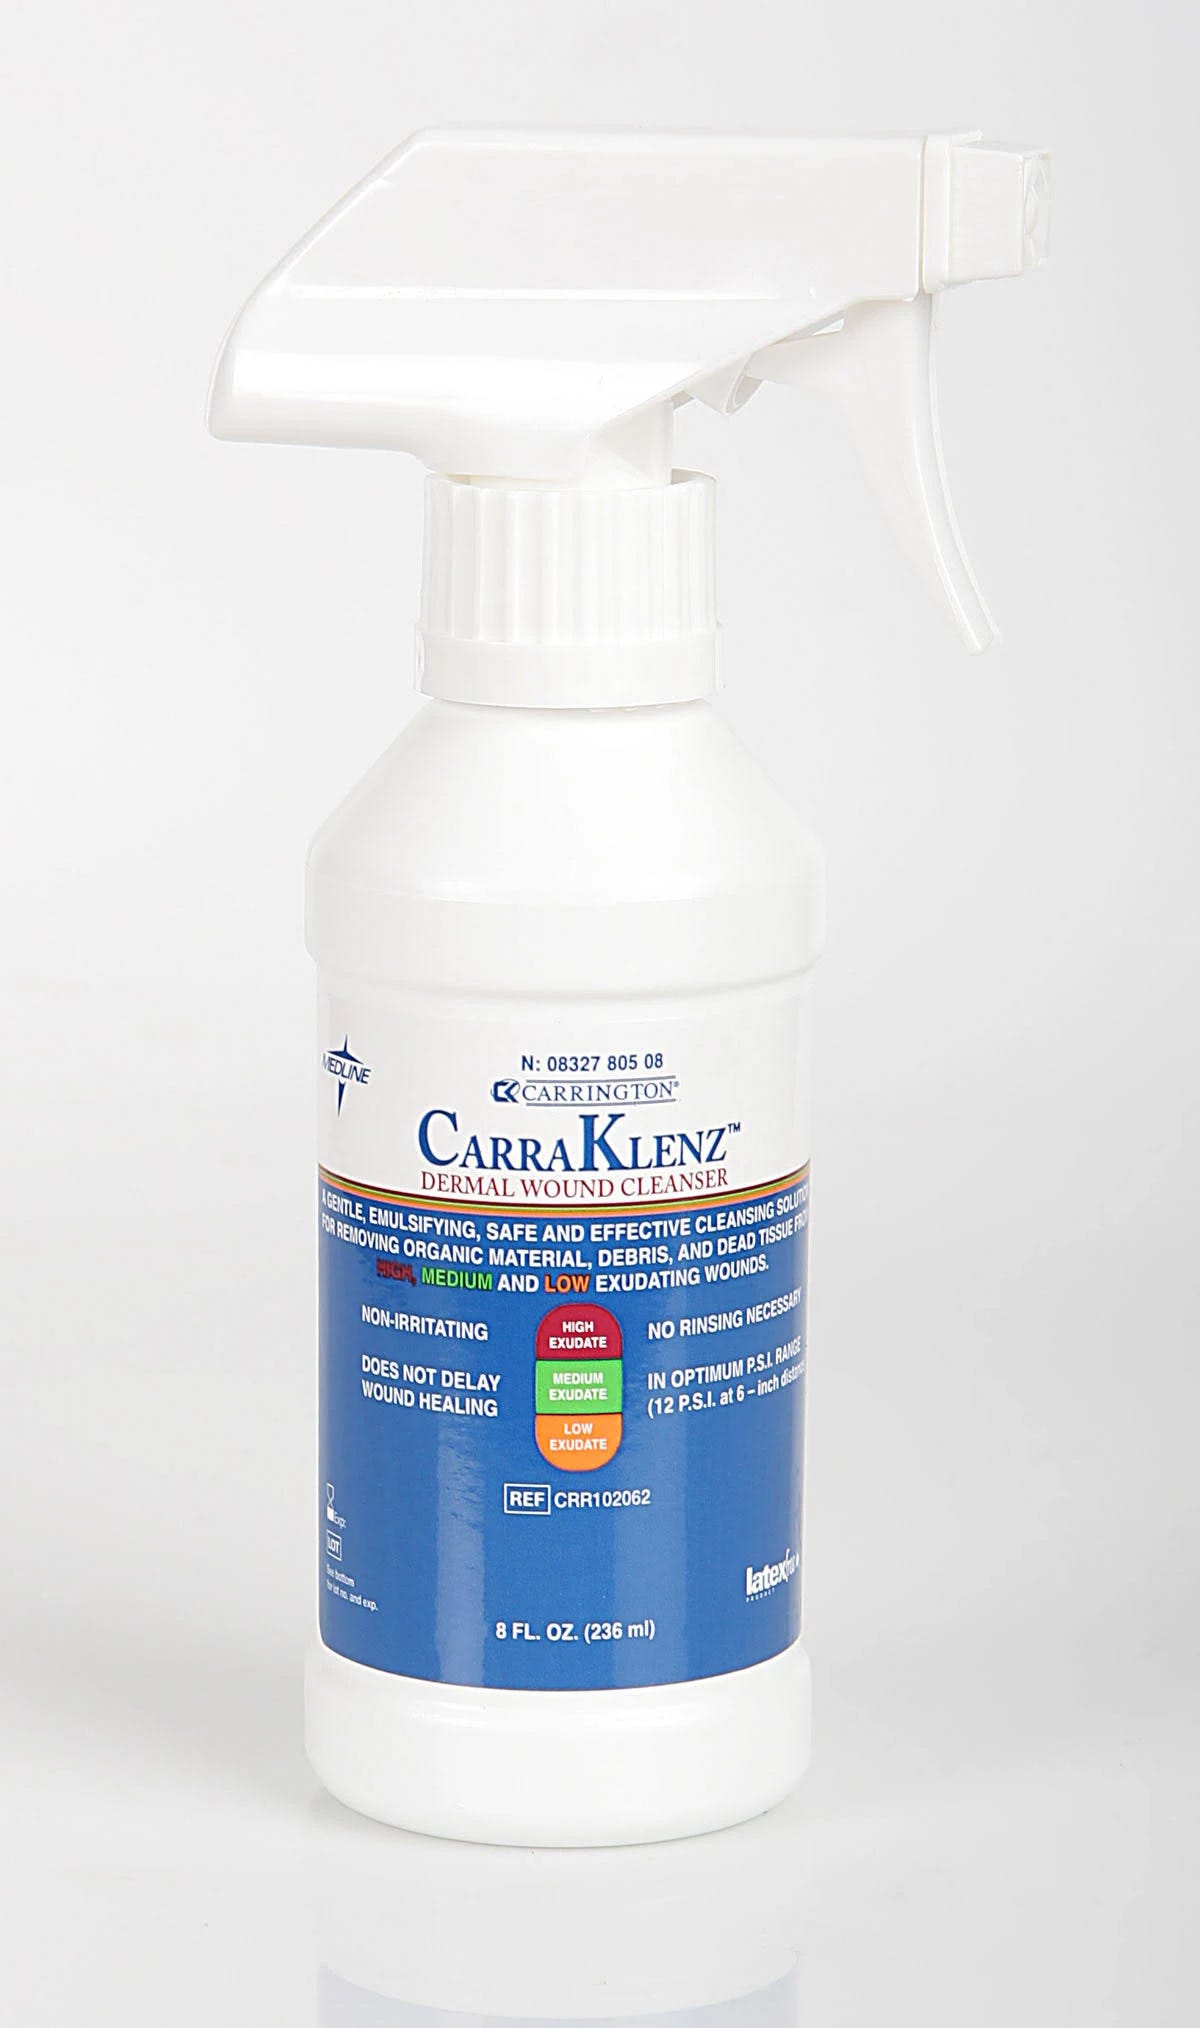 CarraKlenz Wound and Skin Cleansers: Effective Post-Wound Care Solution | Image